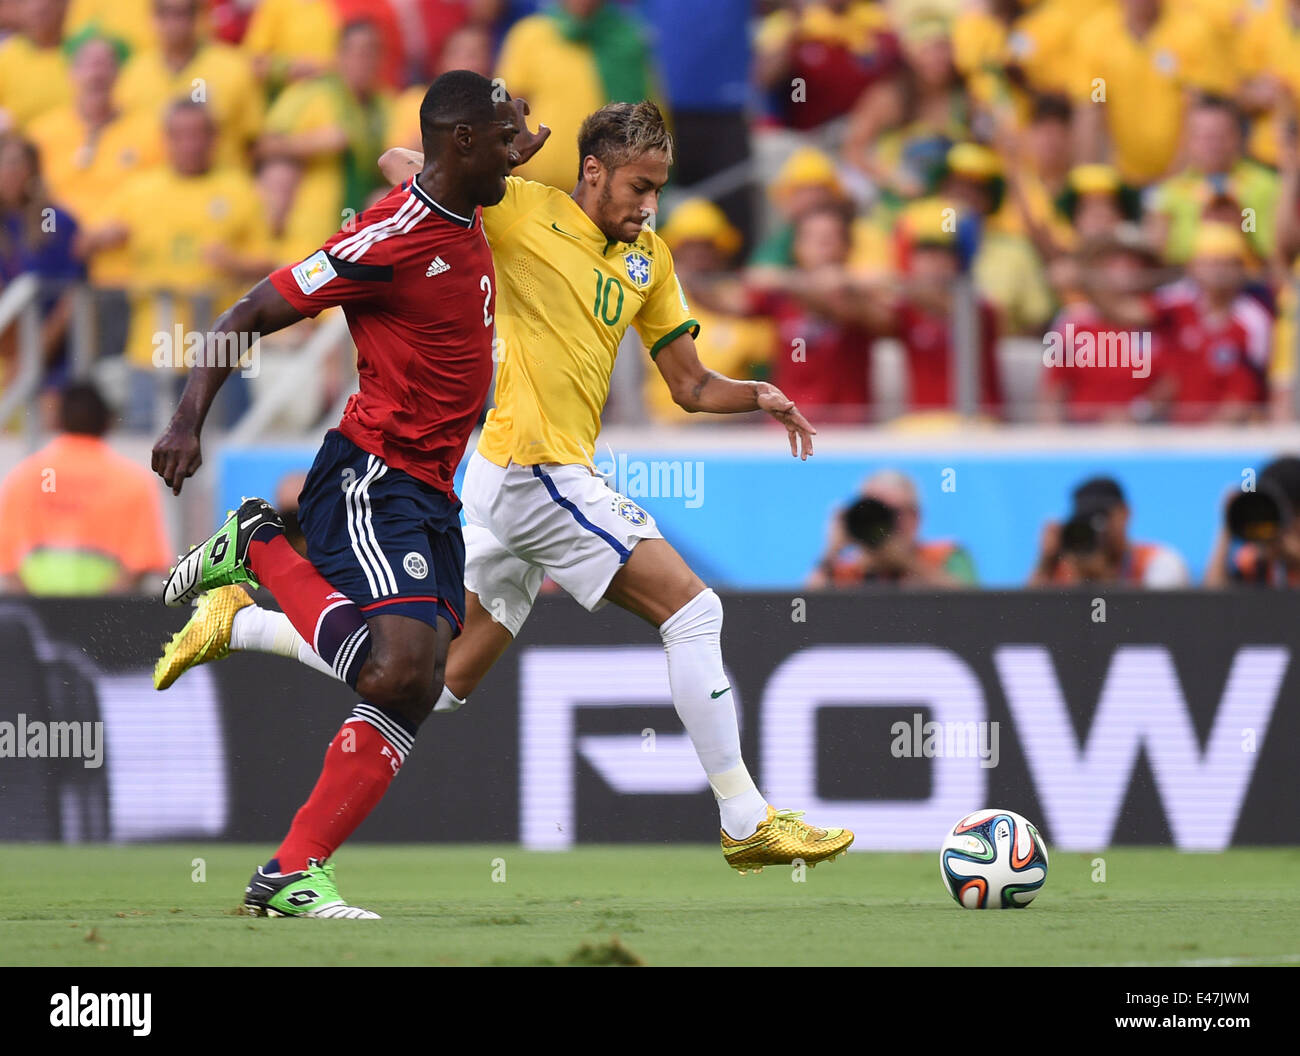 Fortaleza, Brazil. 04th July, 2014. Neymar (R) of Brazil and Cristian Zapata of Colombia vie for the ball during the FIFA World Cup 2014 quarter final match soccer between Brazil and Colombia at the Estadio Castelao in Fortaleza, Brazil, 04 July 2014. Photo: Marius Becker/dpa/Alamy Live News Stock Photo